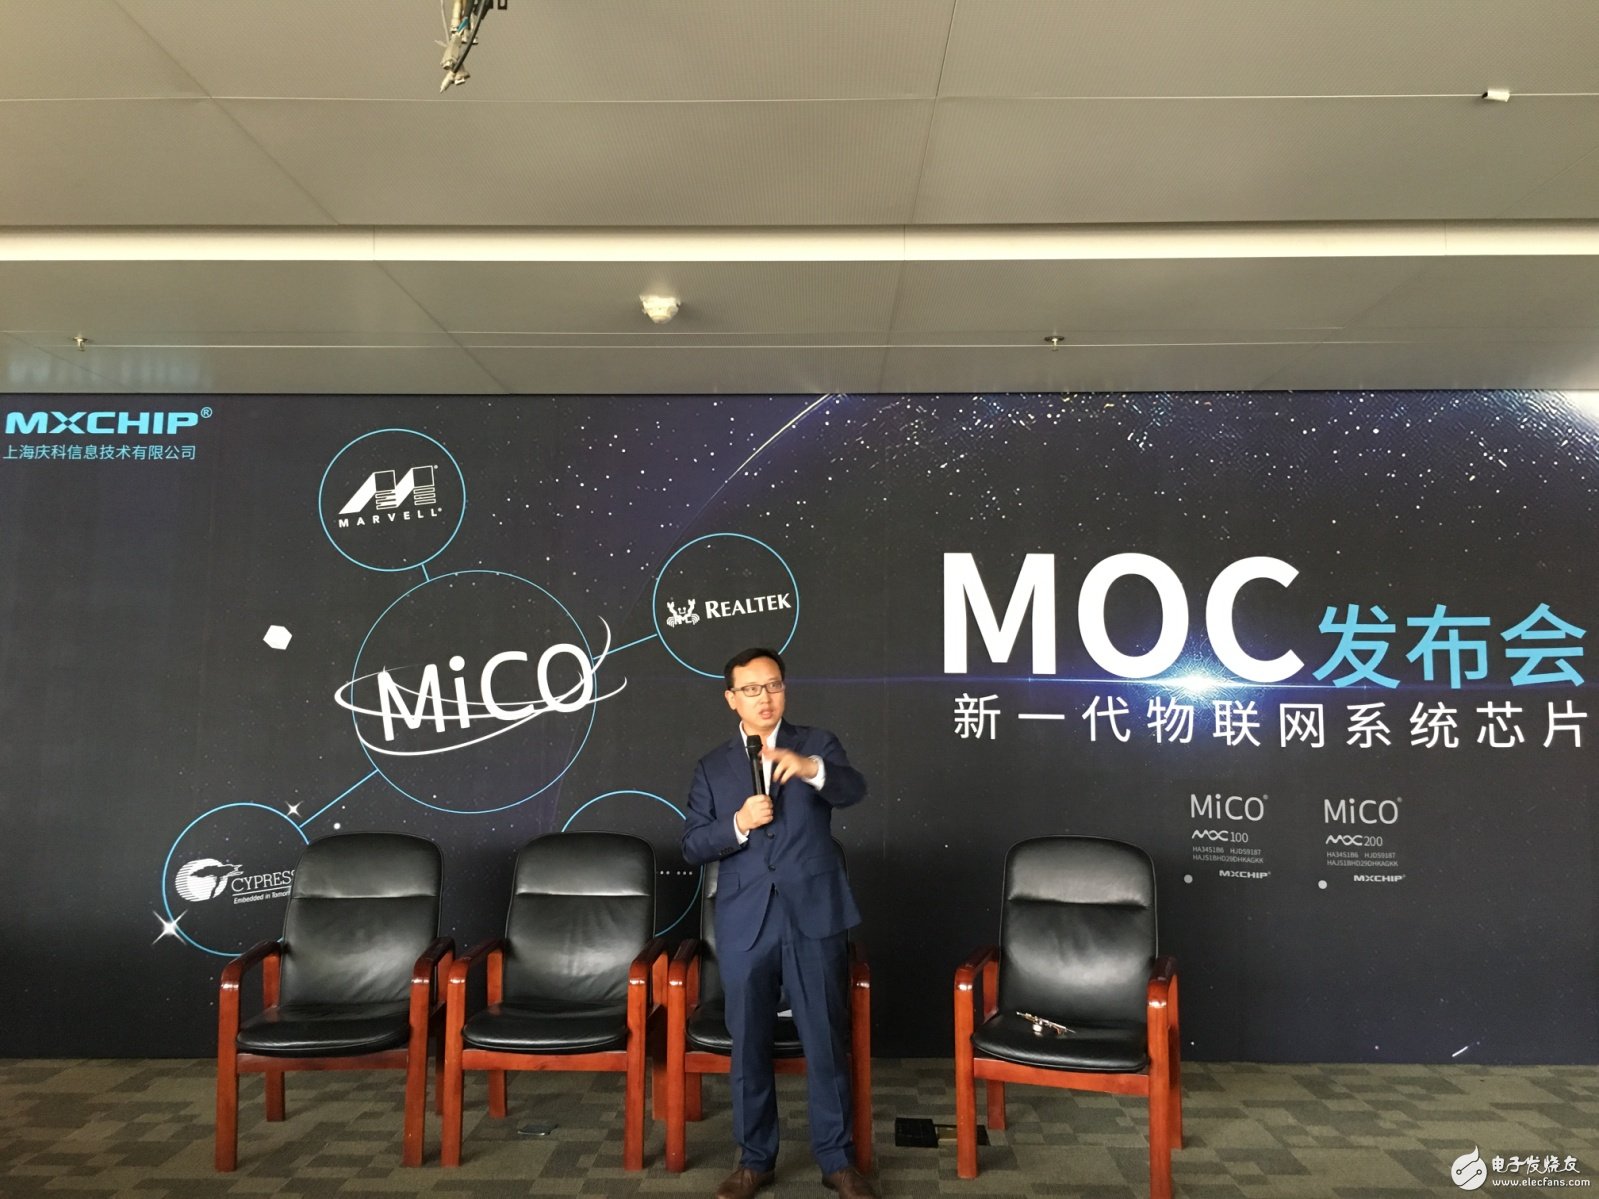 Wang Yonghong, CEO of Shanghai Qingke Information Technology Co., Ltd. released MOC next-generation IoT system chip